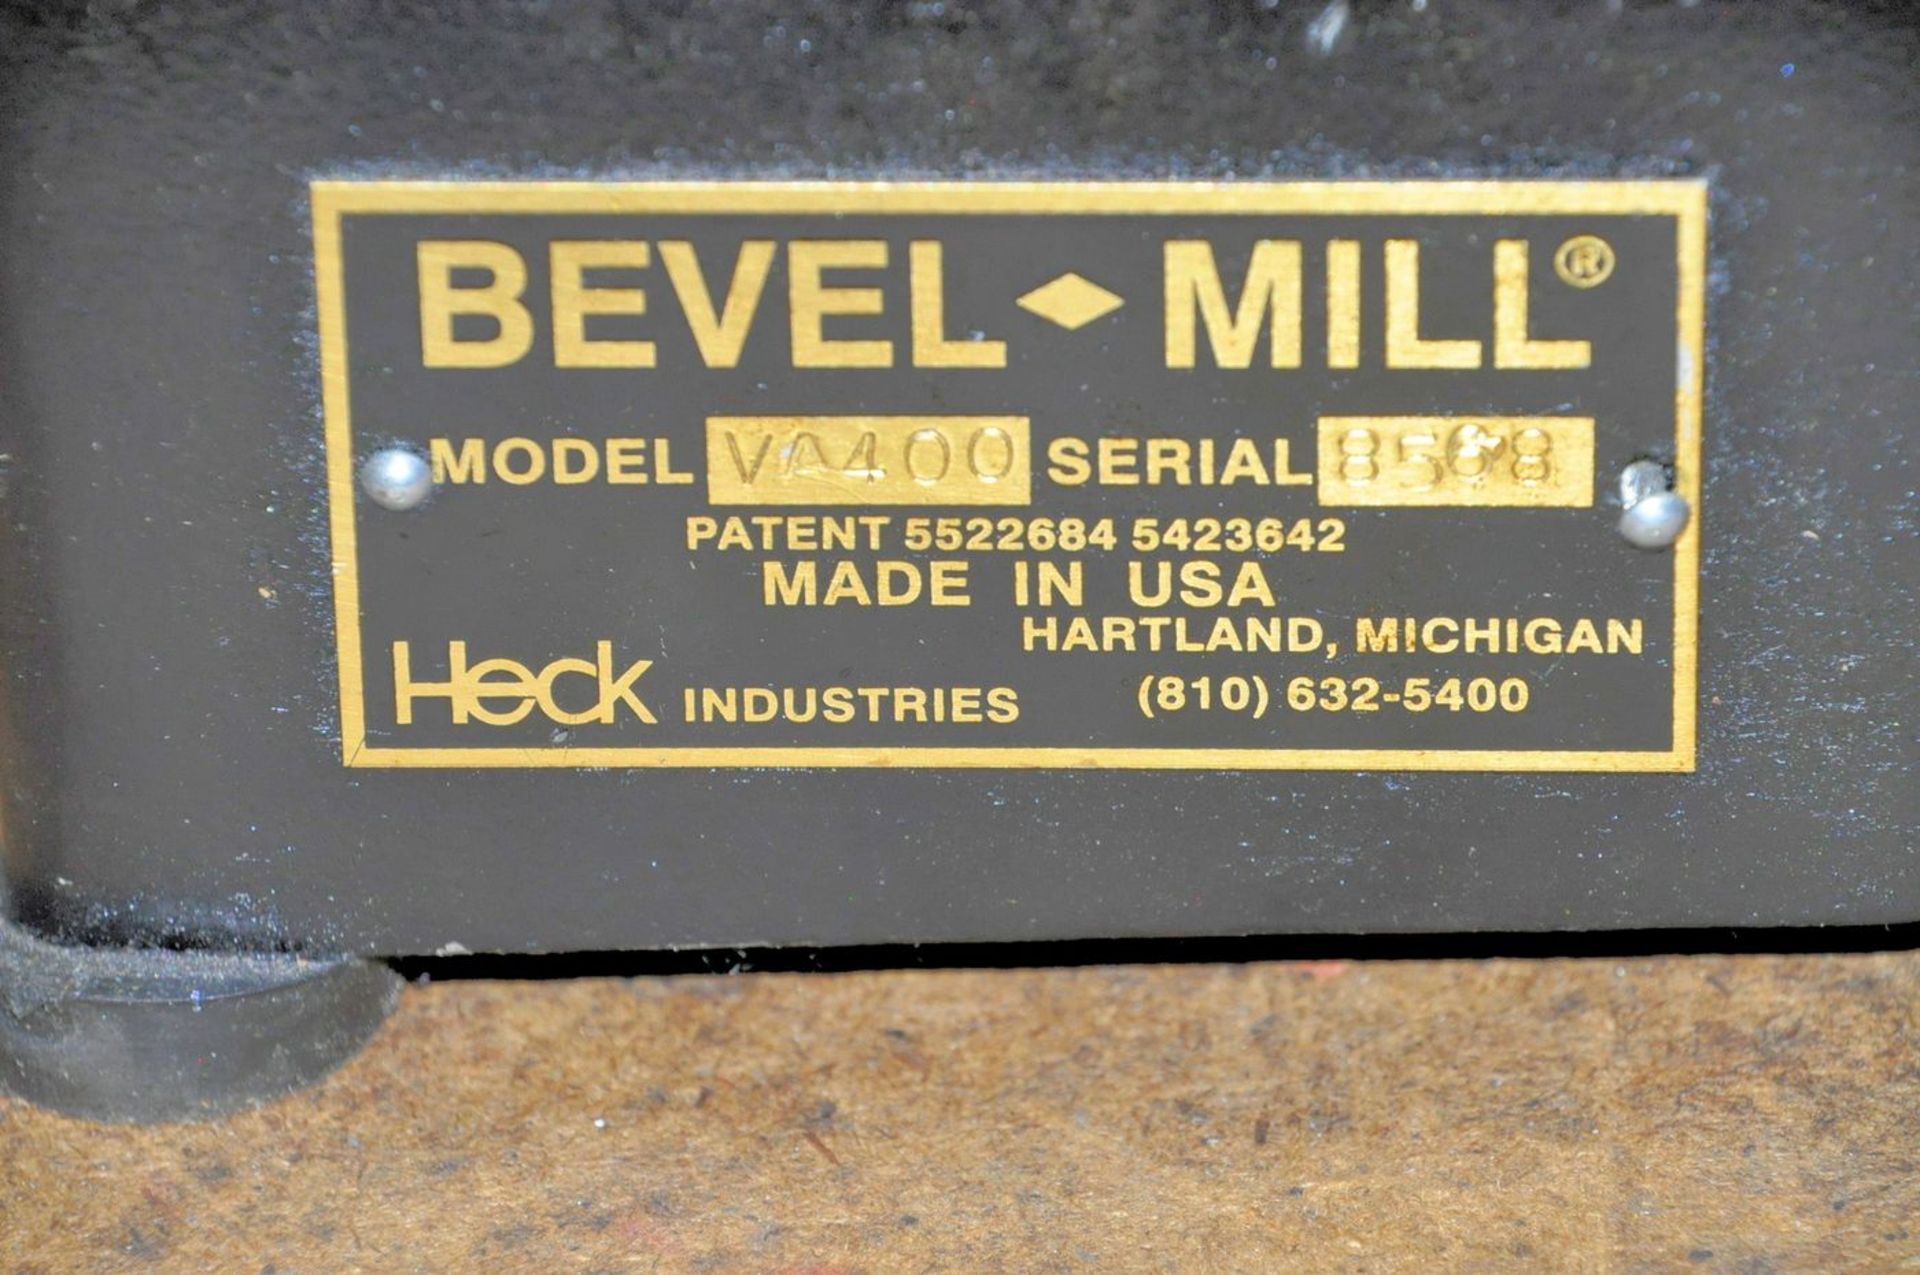 Heck Model VA400 Bench Top Bevel Mill S/N 8568, 19-1/2" Table - Image 4 of 4